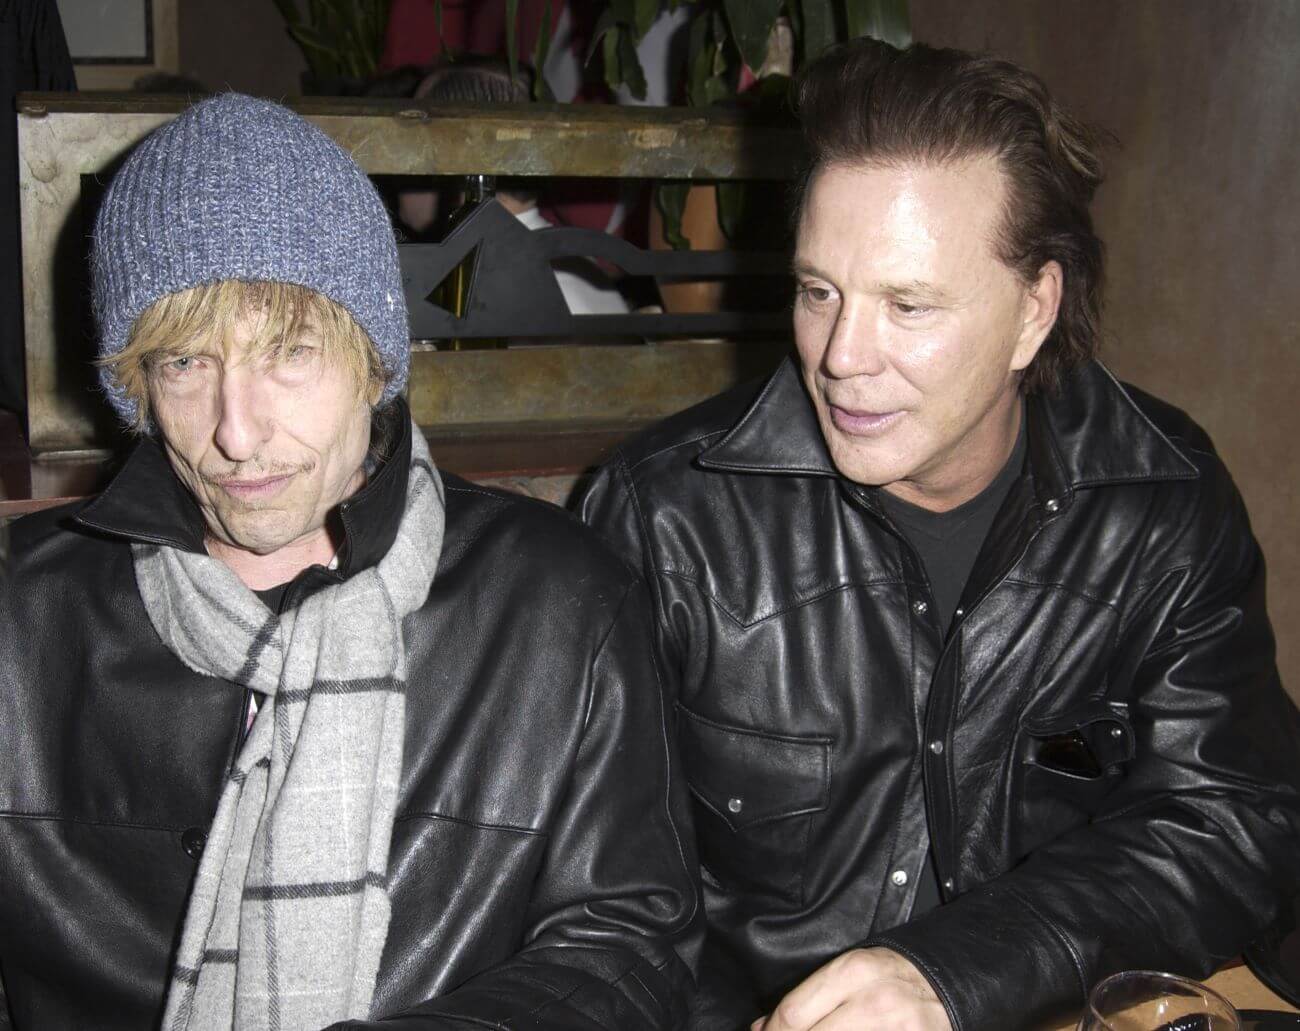 Bob Dylan and Mickey Rourke wear black leather jackets and sit together. Dylan wears a gray scarf, blue knit cap, and blonde wig.